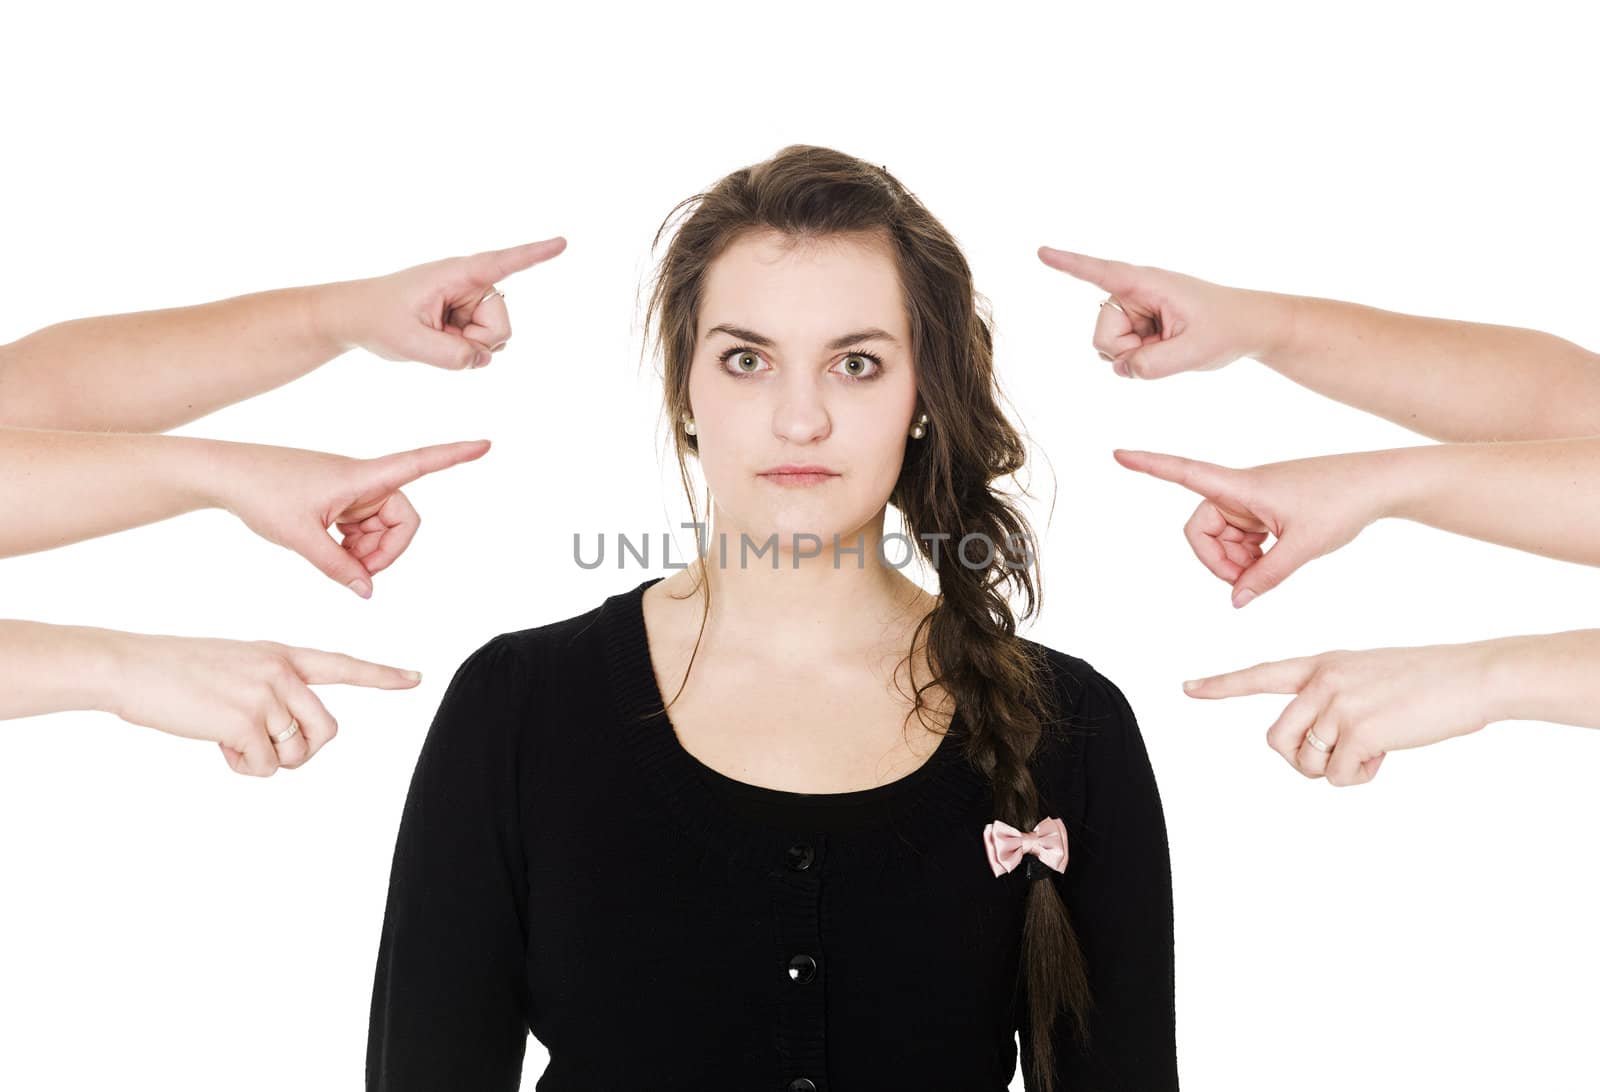 Group of Hands pointing at a woman on white background